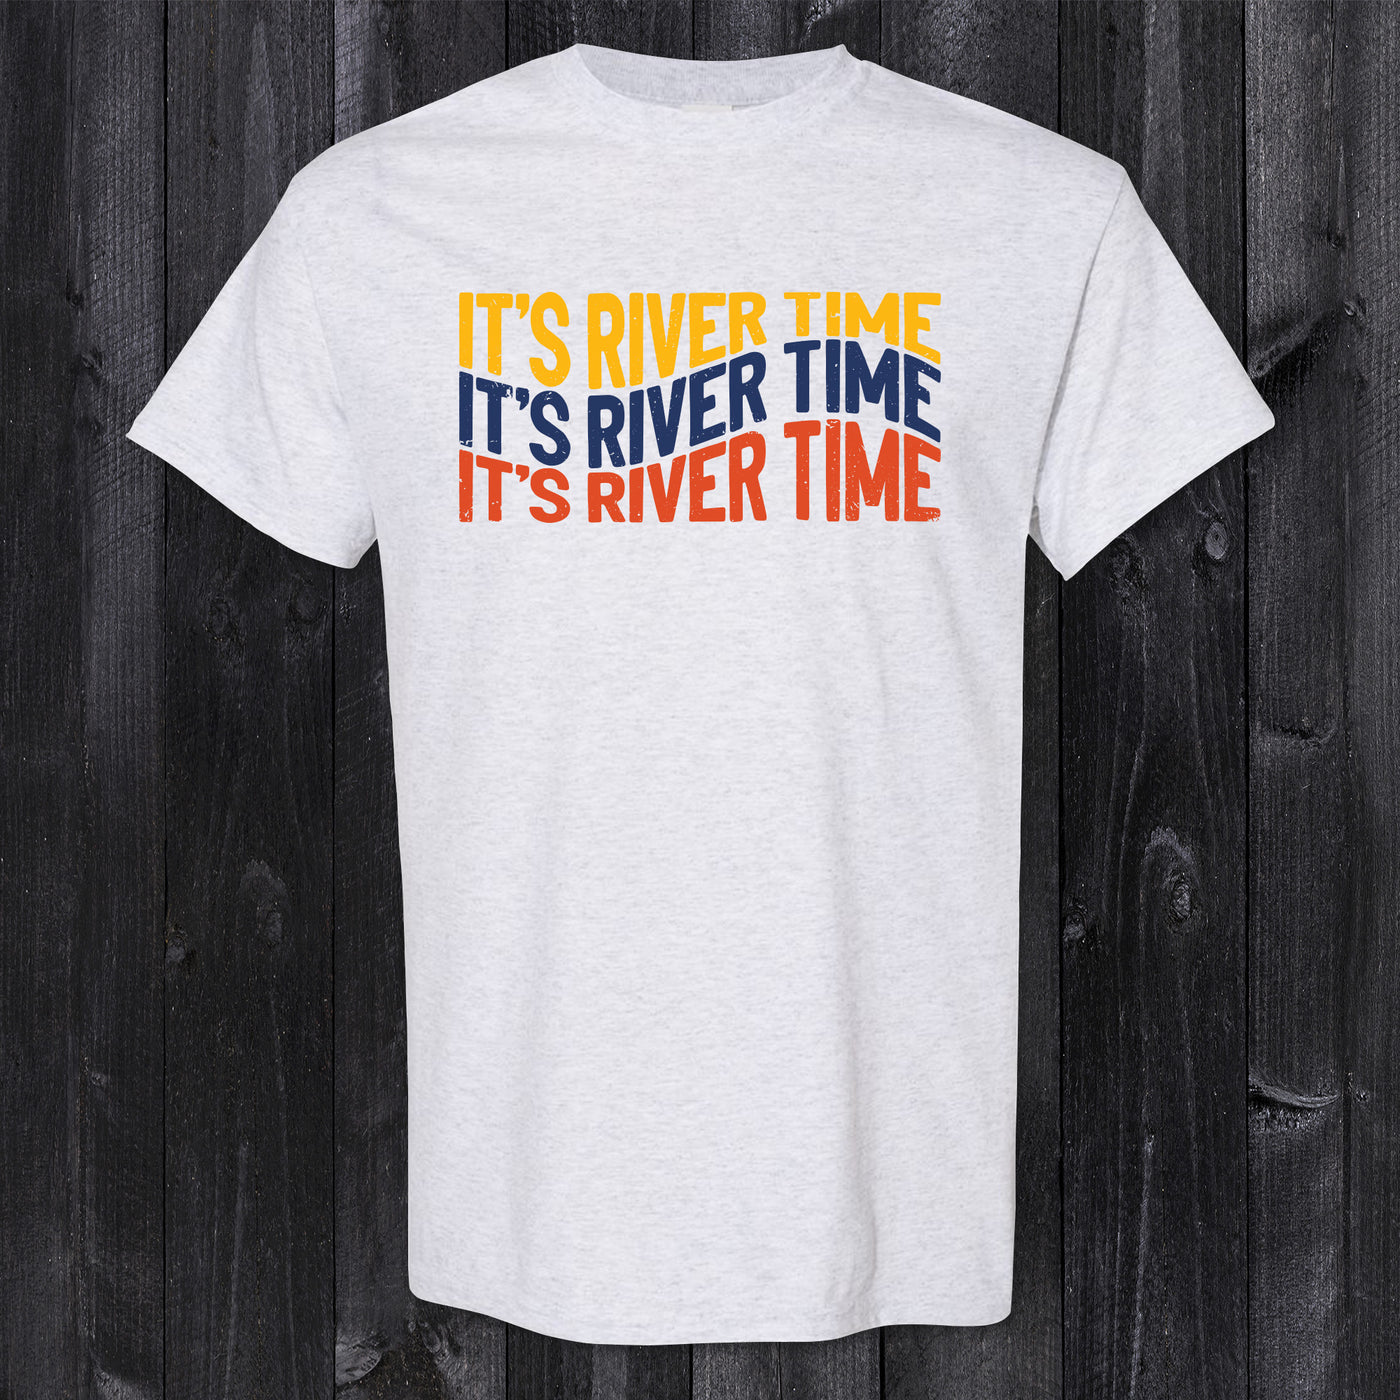 Daydream Tees It's River Time